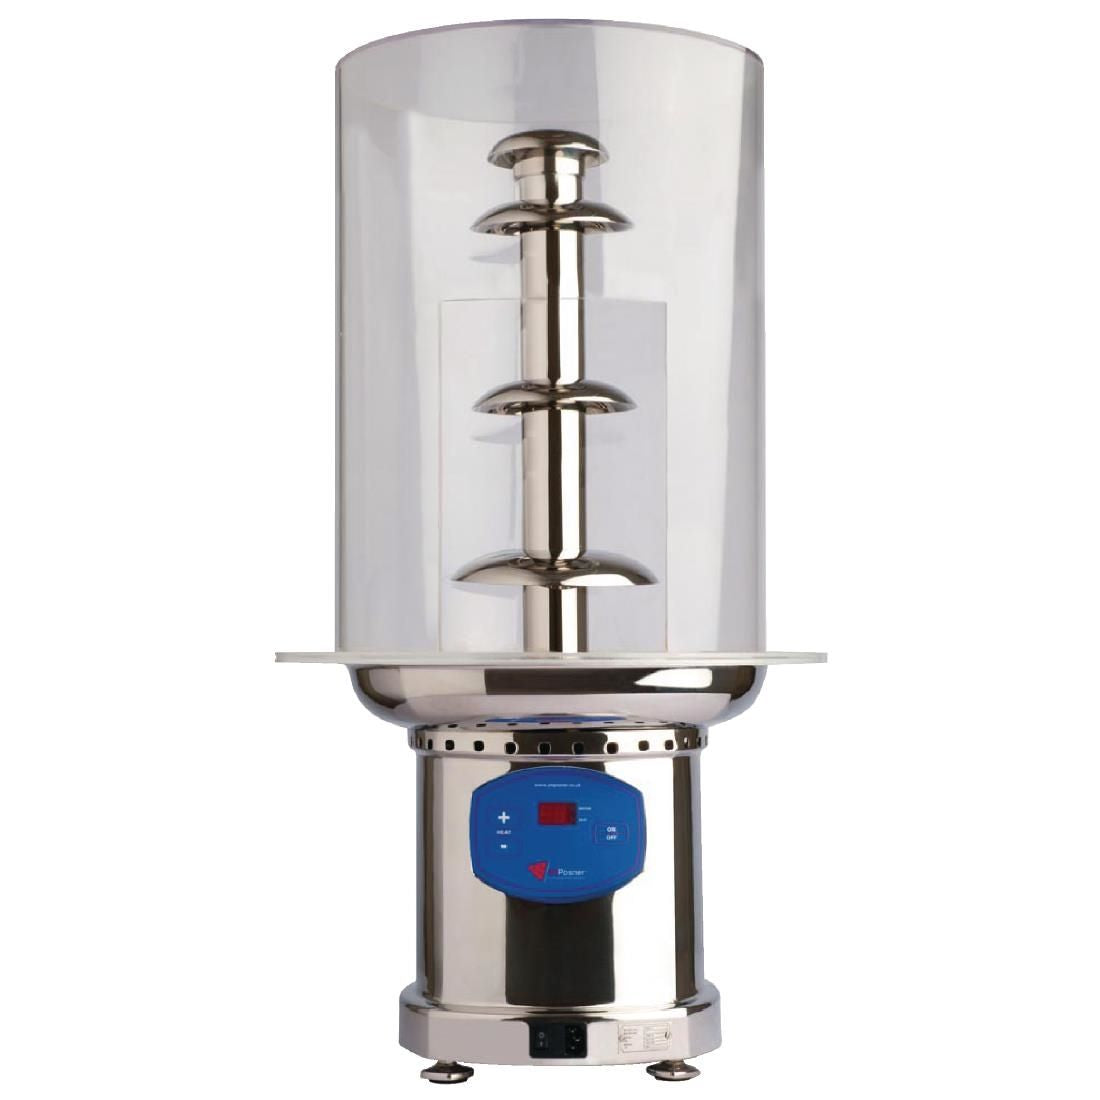 DK839 JM Posner Chocolate Fountain Wind Guard for DN675 JD Catering Equipment Solutions Ltd